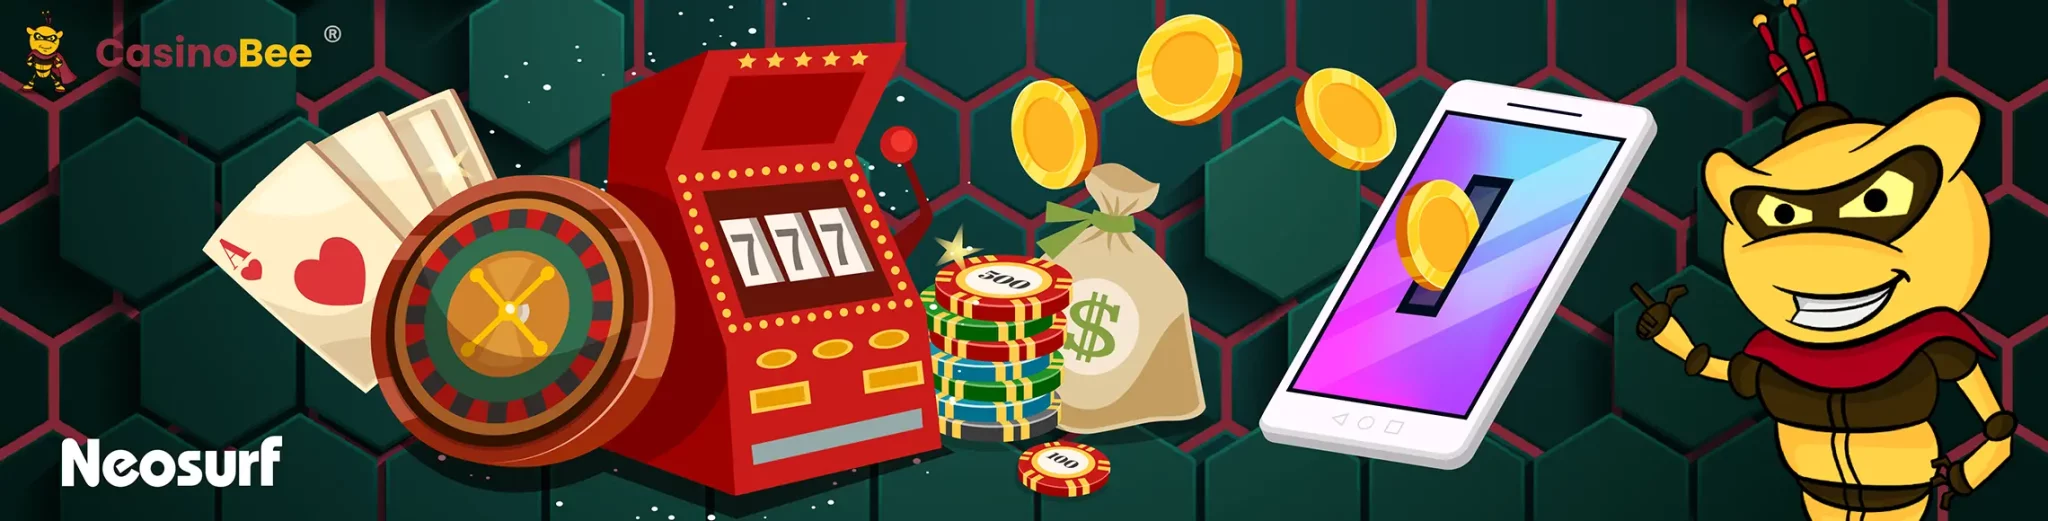 Experience the Excitement of Neosurf Casino Games